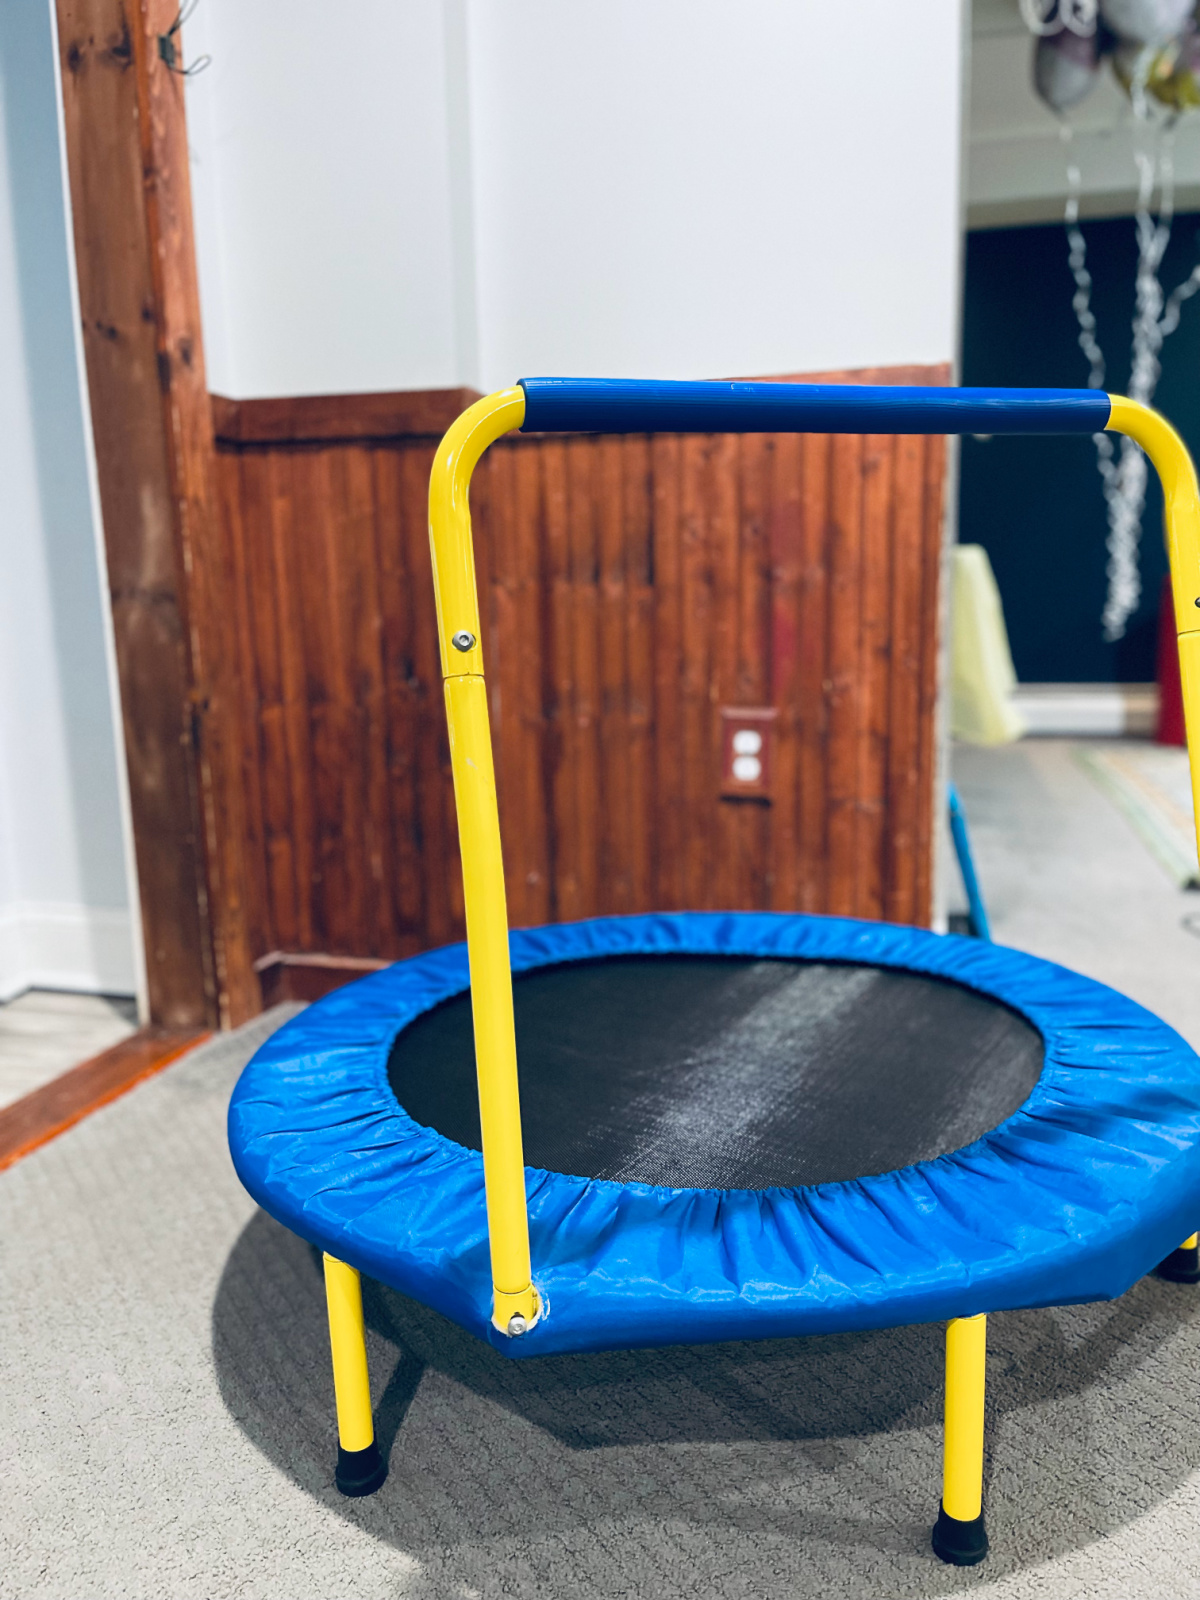 small indoor trampoline with support bar for kids in playroom.